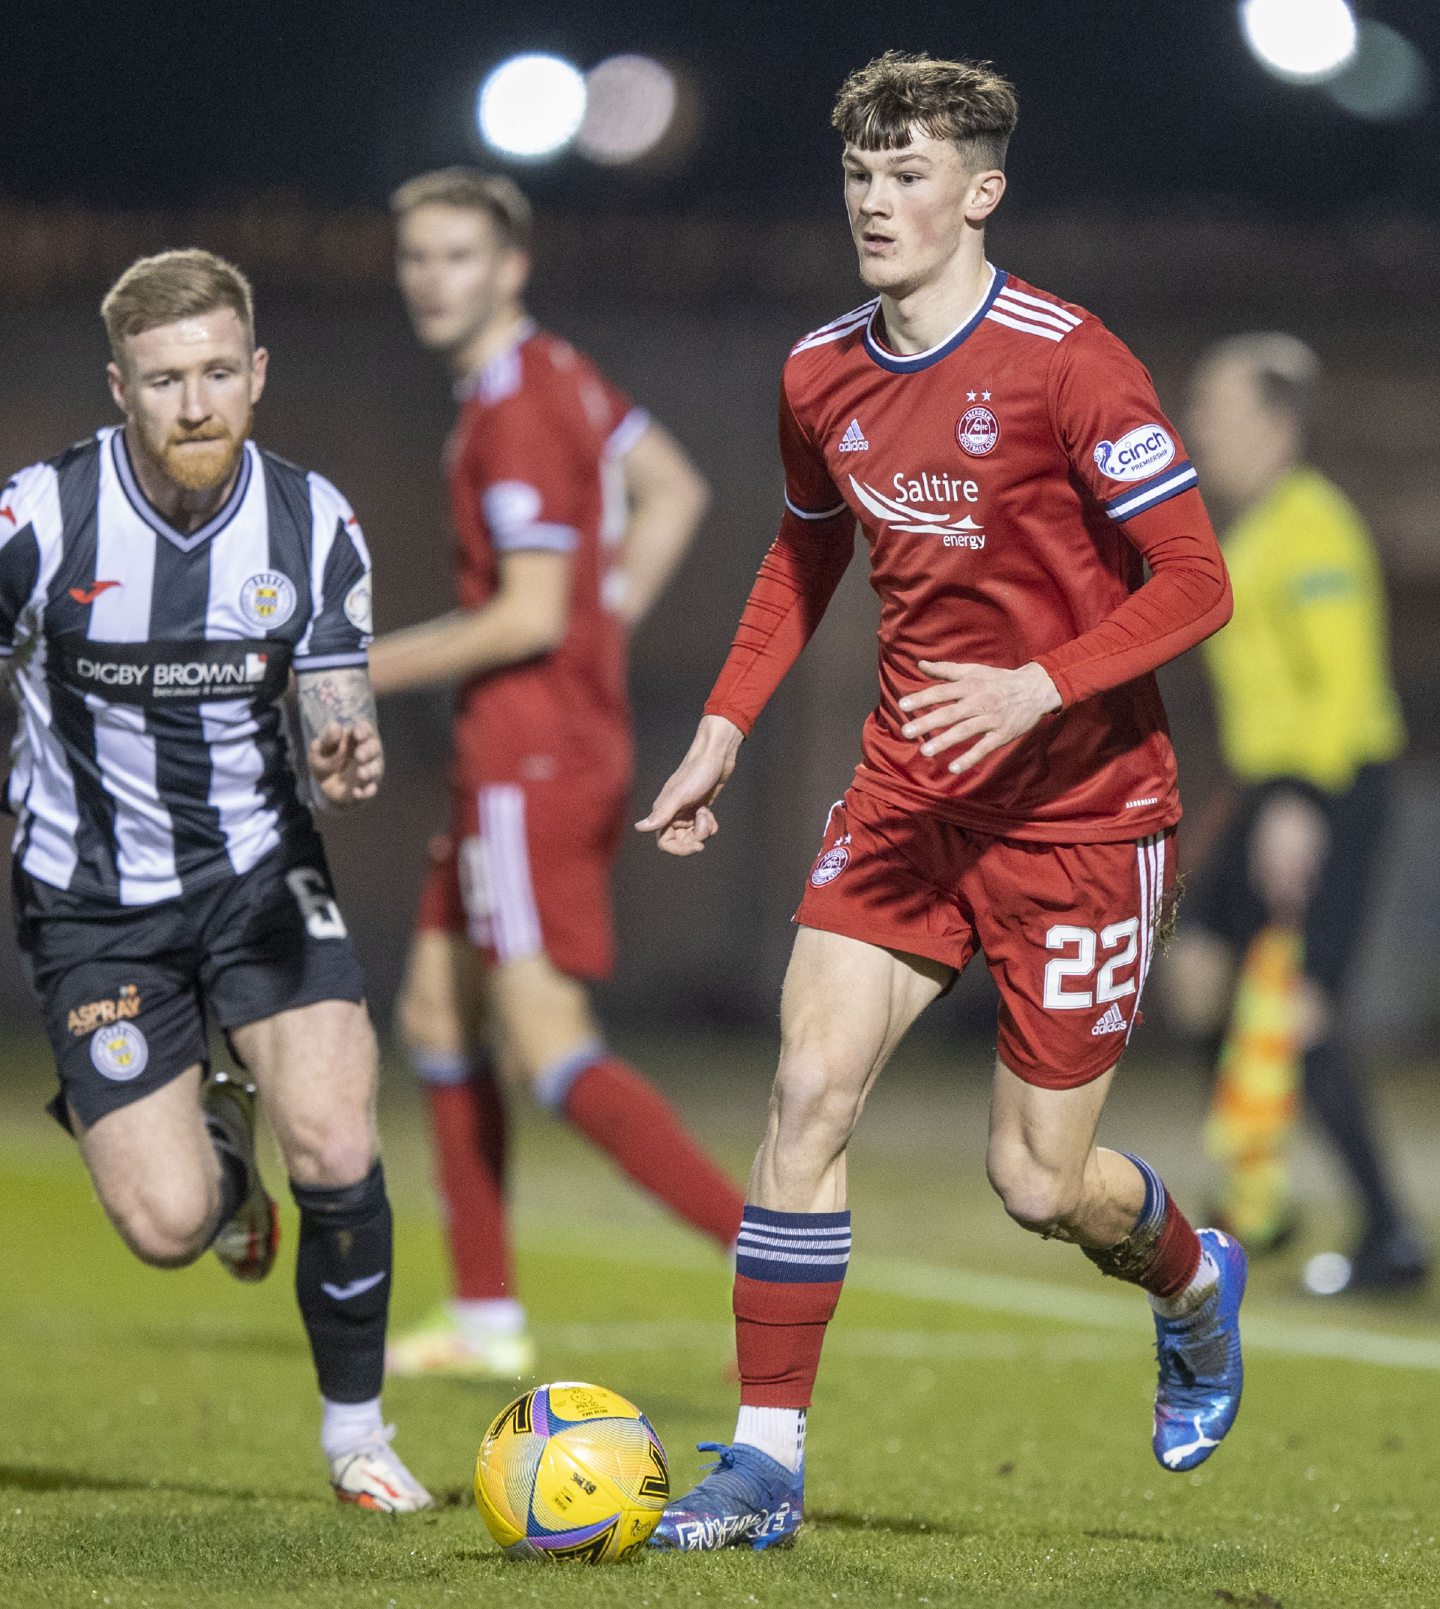 Aberdeen right-back Calvin Ramsay in action on the football pitch in the 1-0 loss at St Mirren.